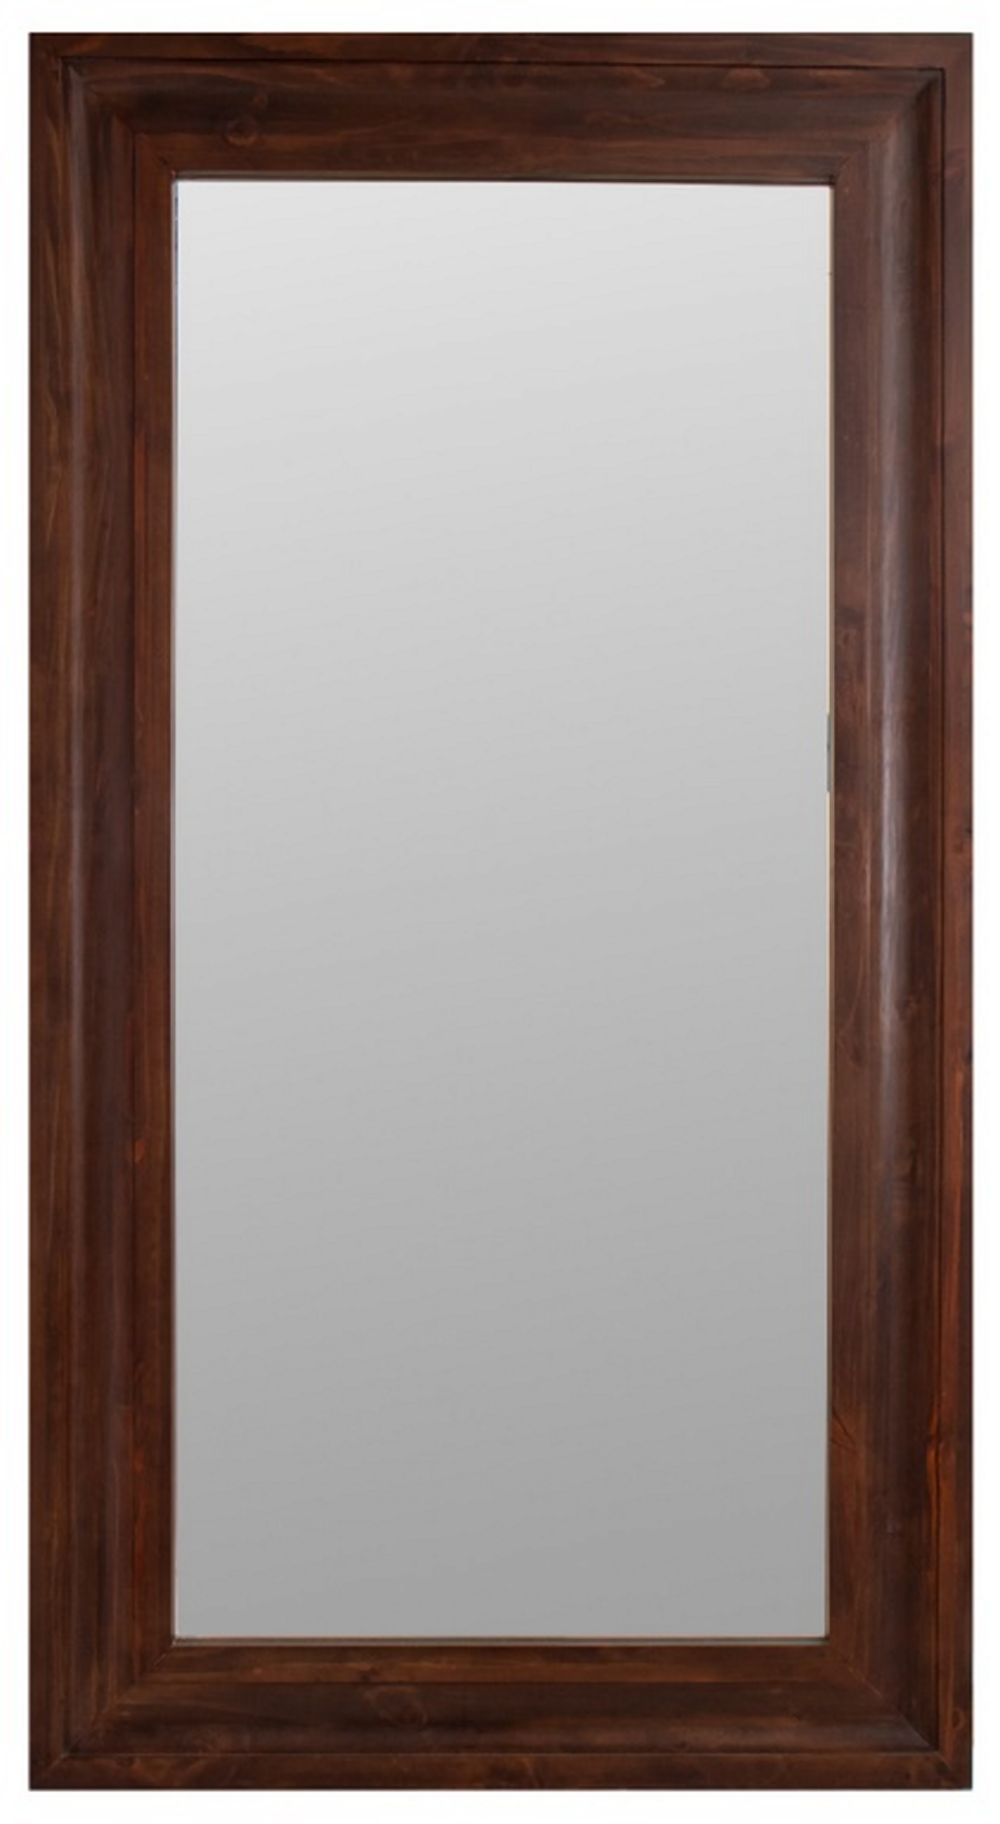 MONUMENTAL OGEE STYLE WOODEN BEVELED 35ff4d